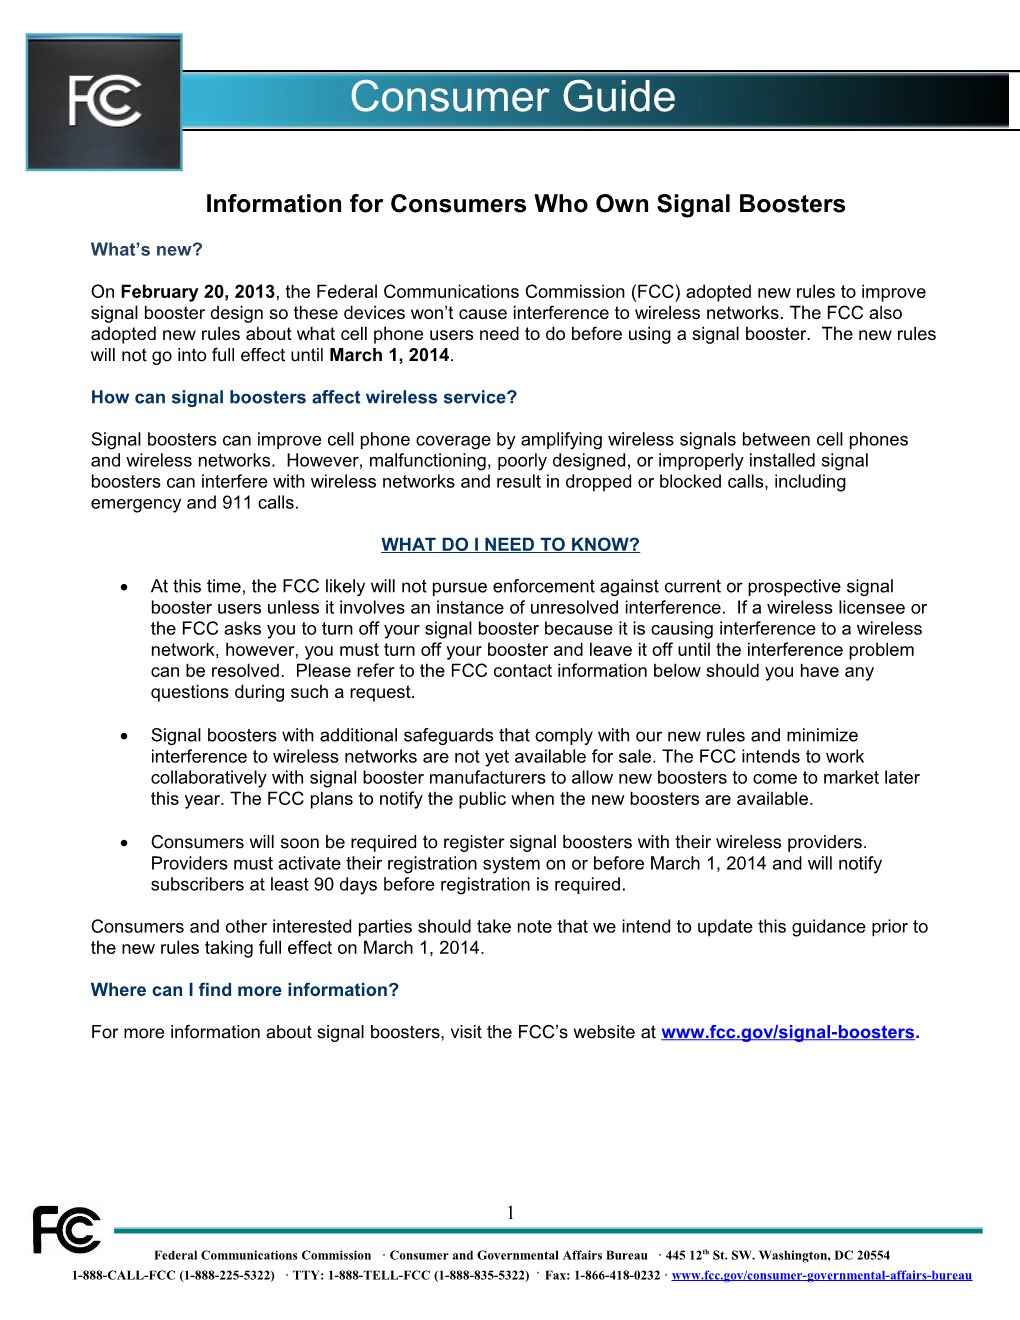 Information for Consumers Who Own Signal Boosters